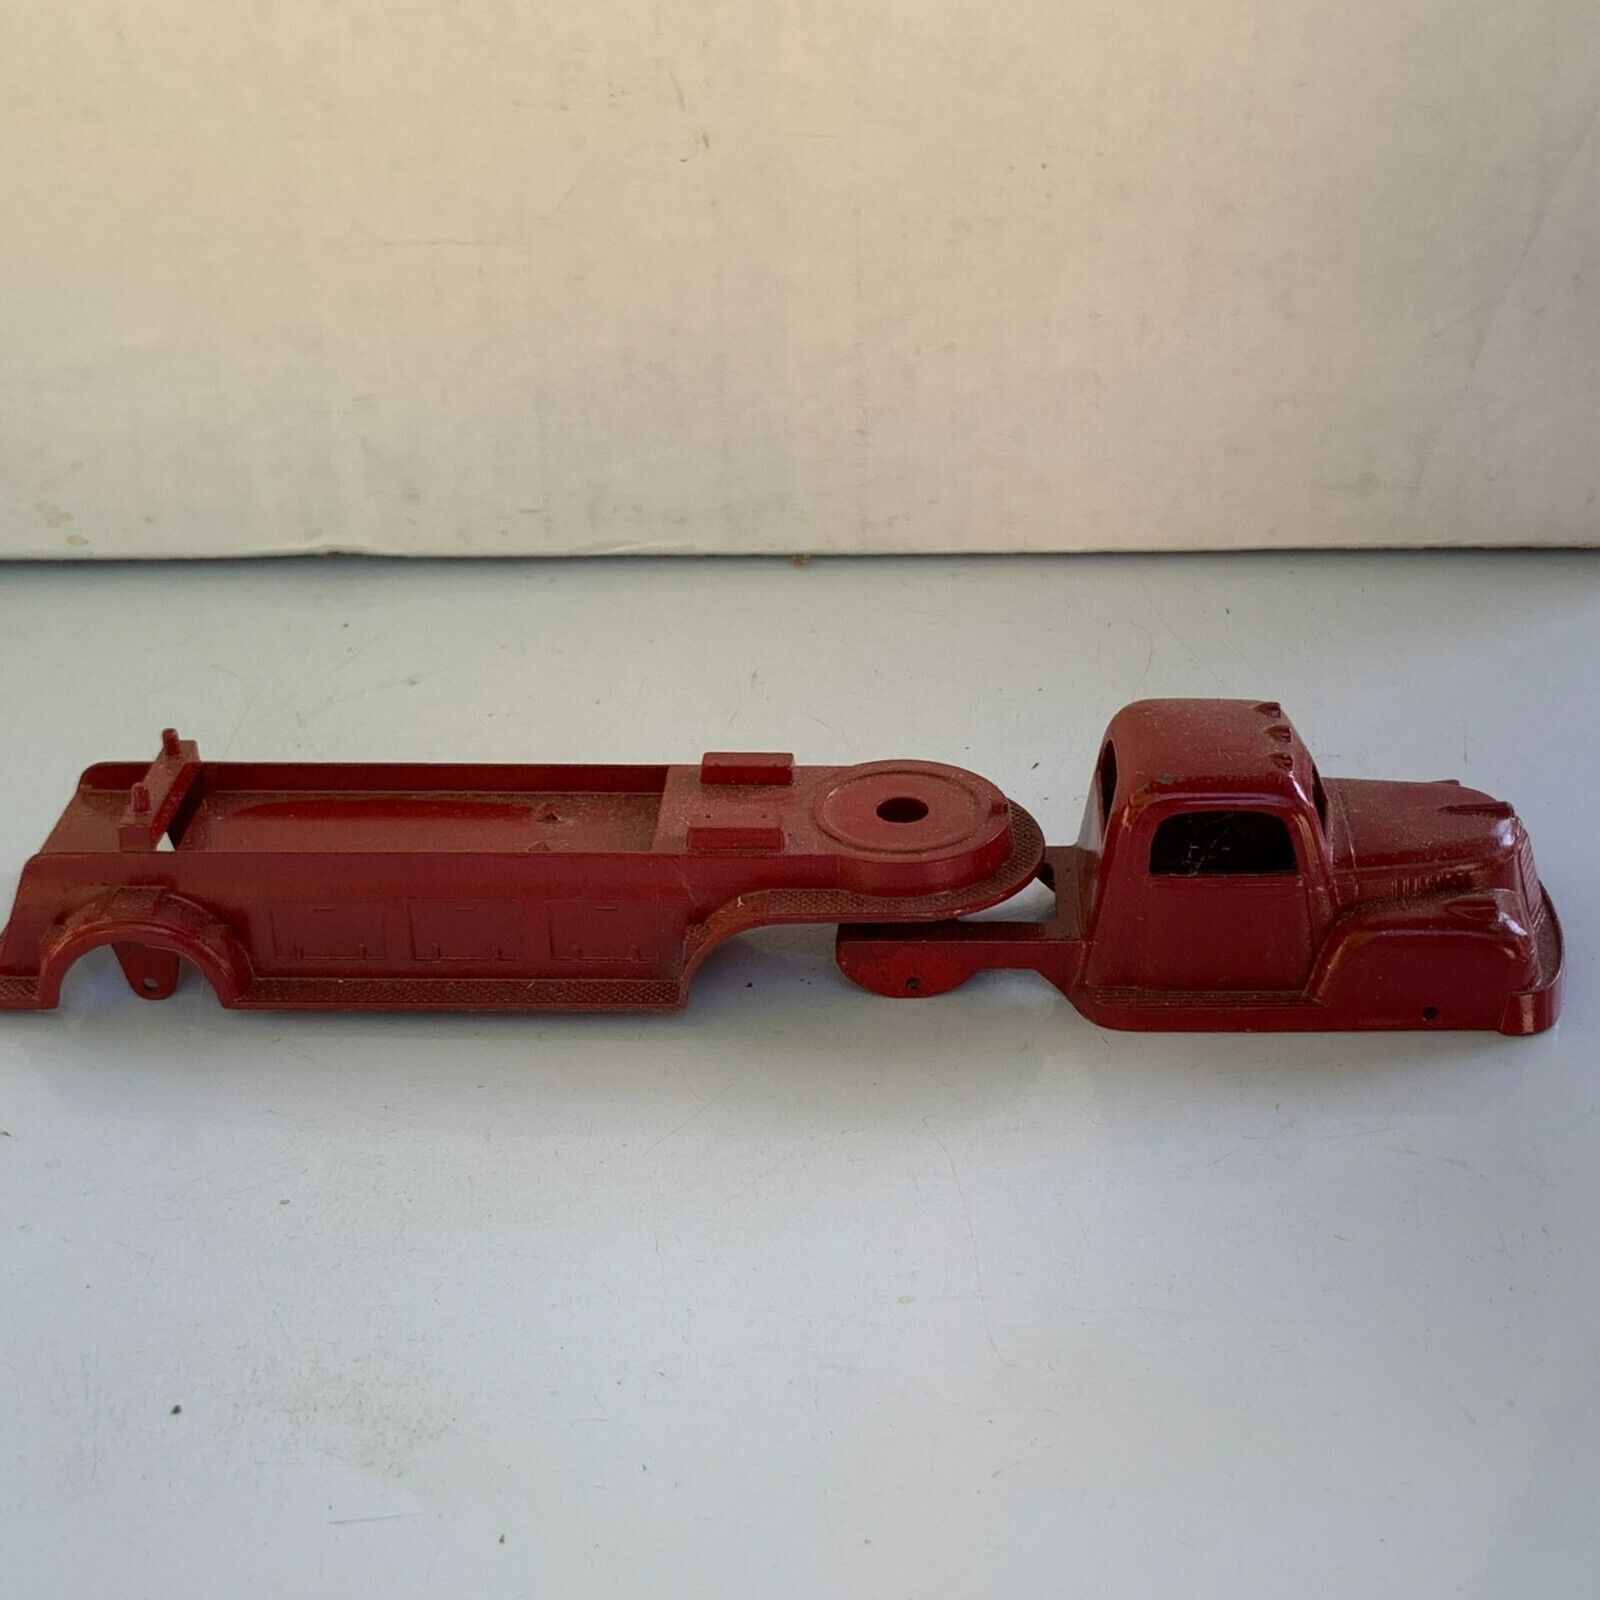 Tootsietoy Vintage Diecast Red Semi Tractor Trailer Body Shell from 1950s - $24.74